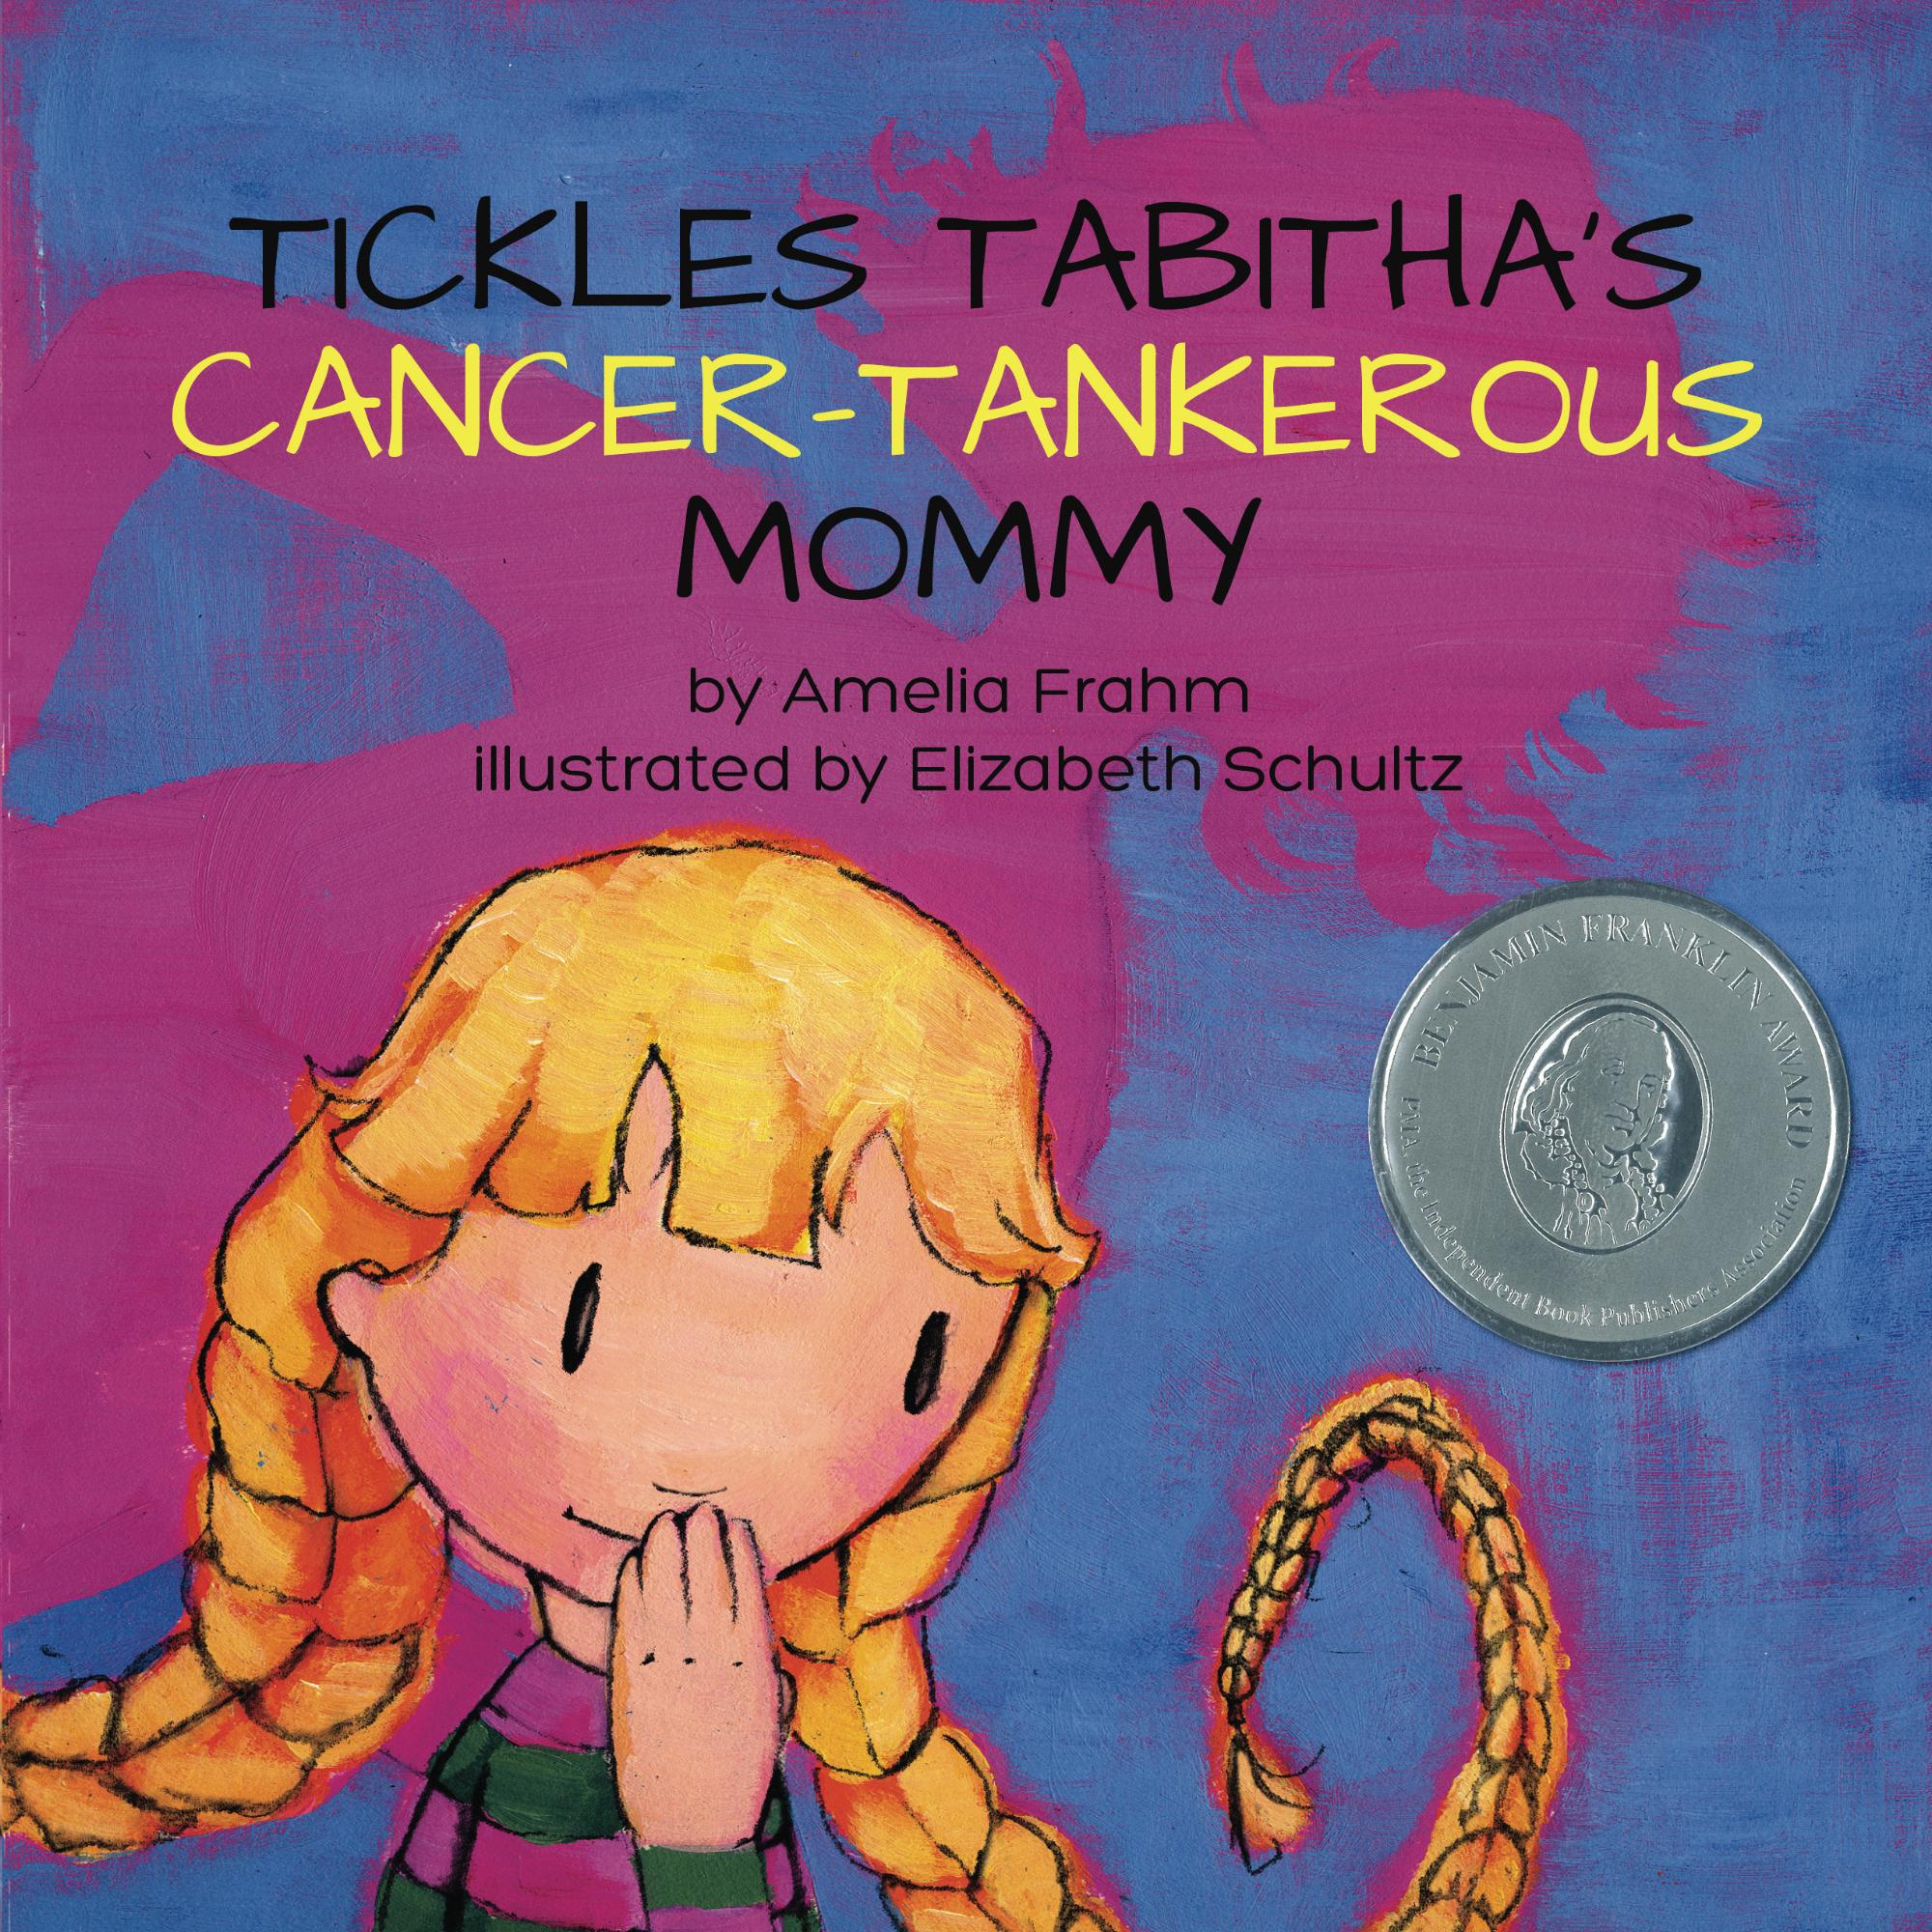 FREE: Tickles Tabitha’s Cancer-tankerous Mommy by Amelia Frahm